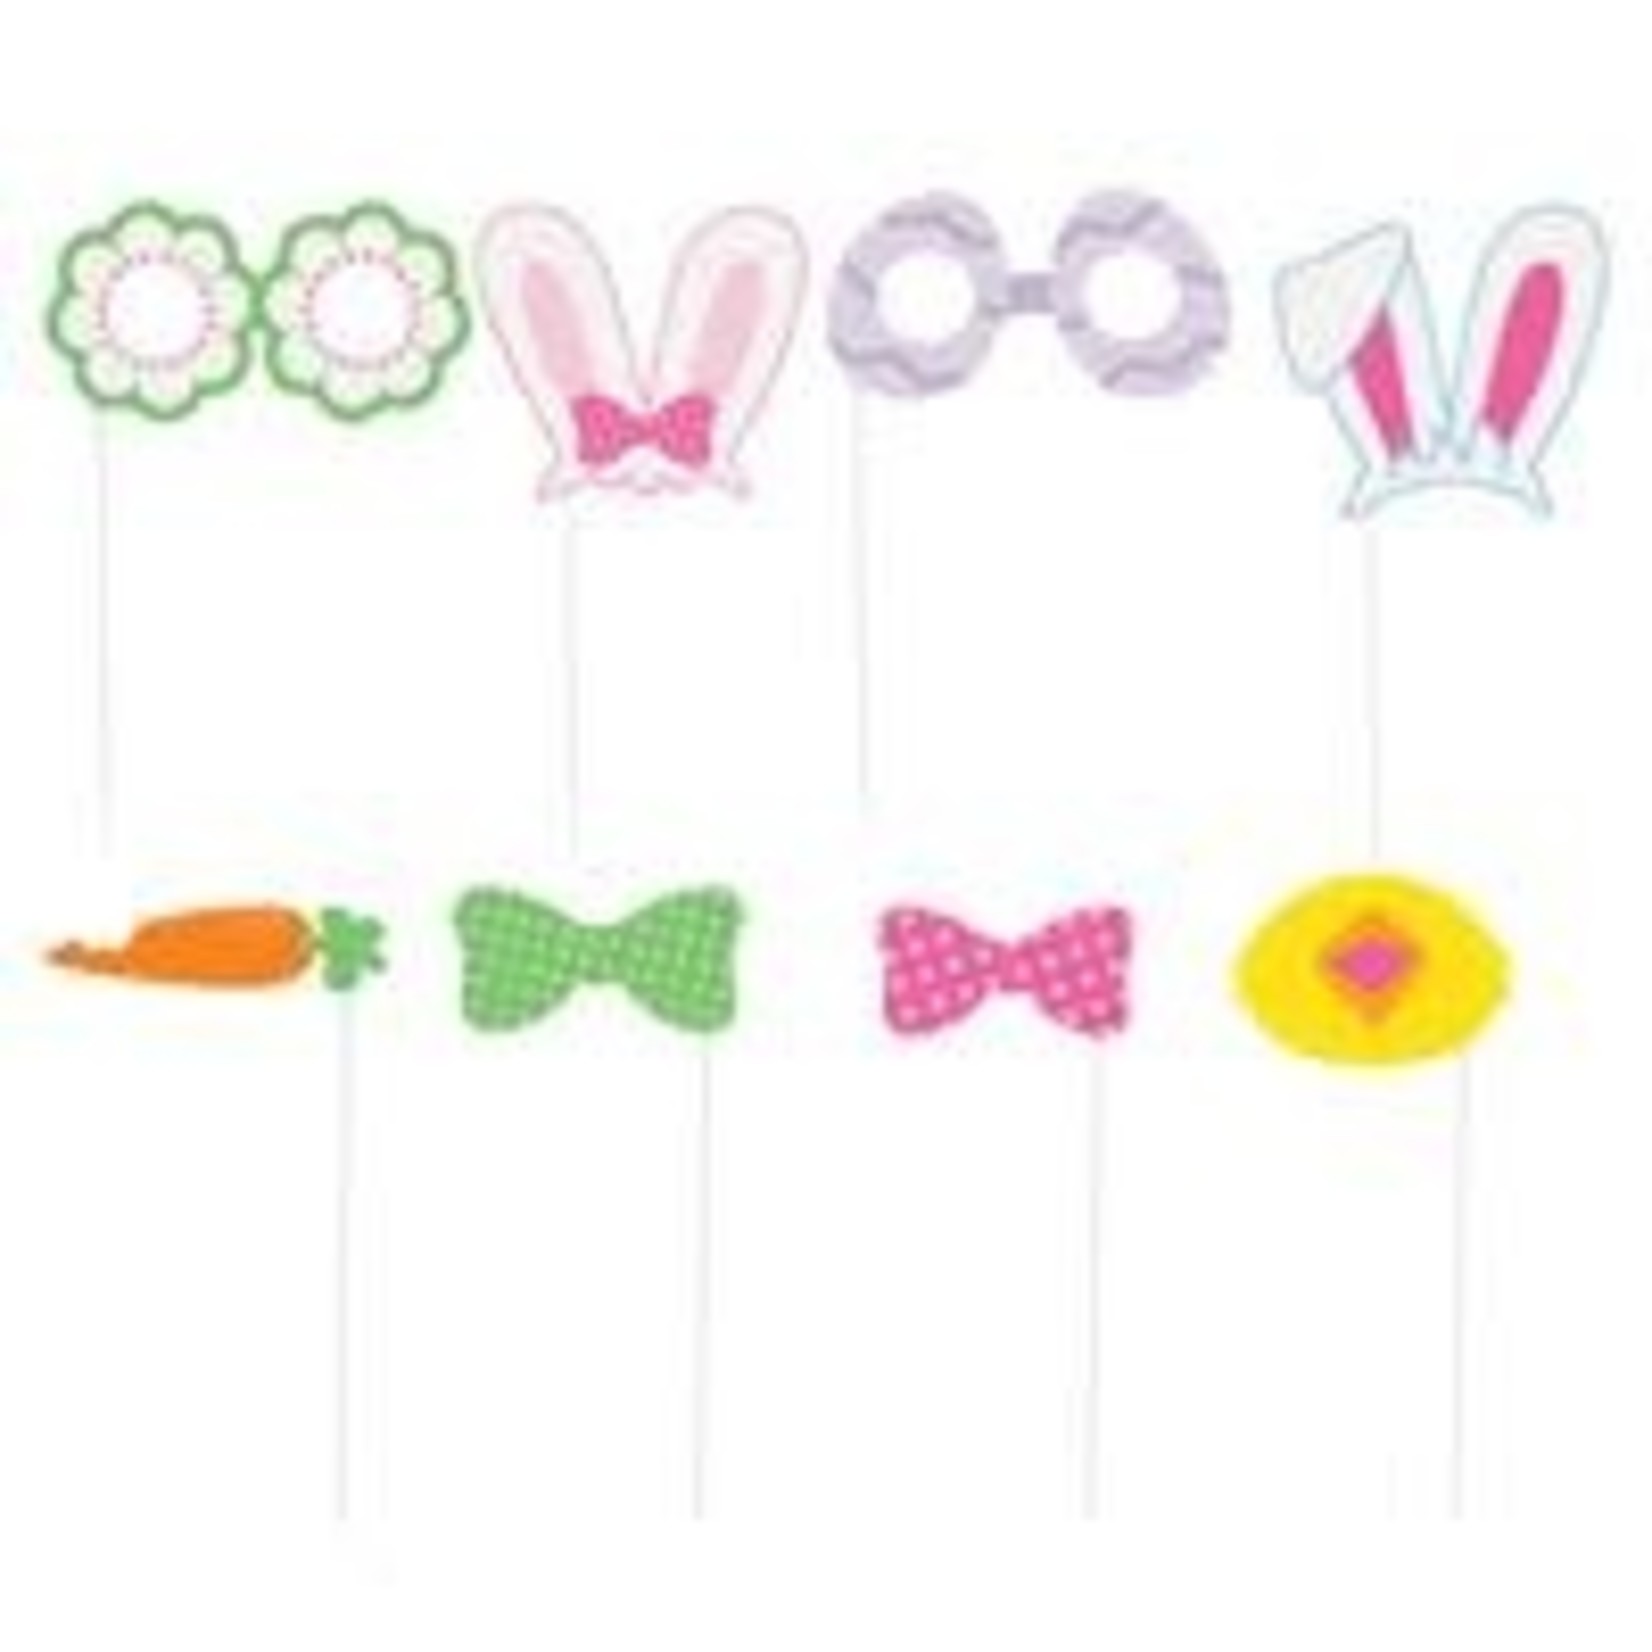 unique Easter Spring Photo Booth Props - 10ct.